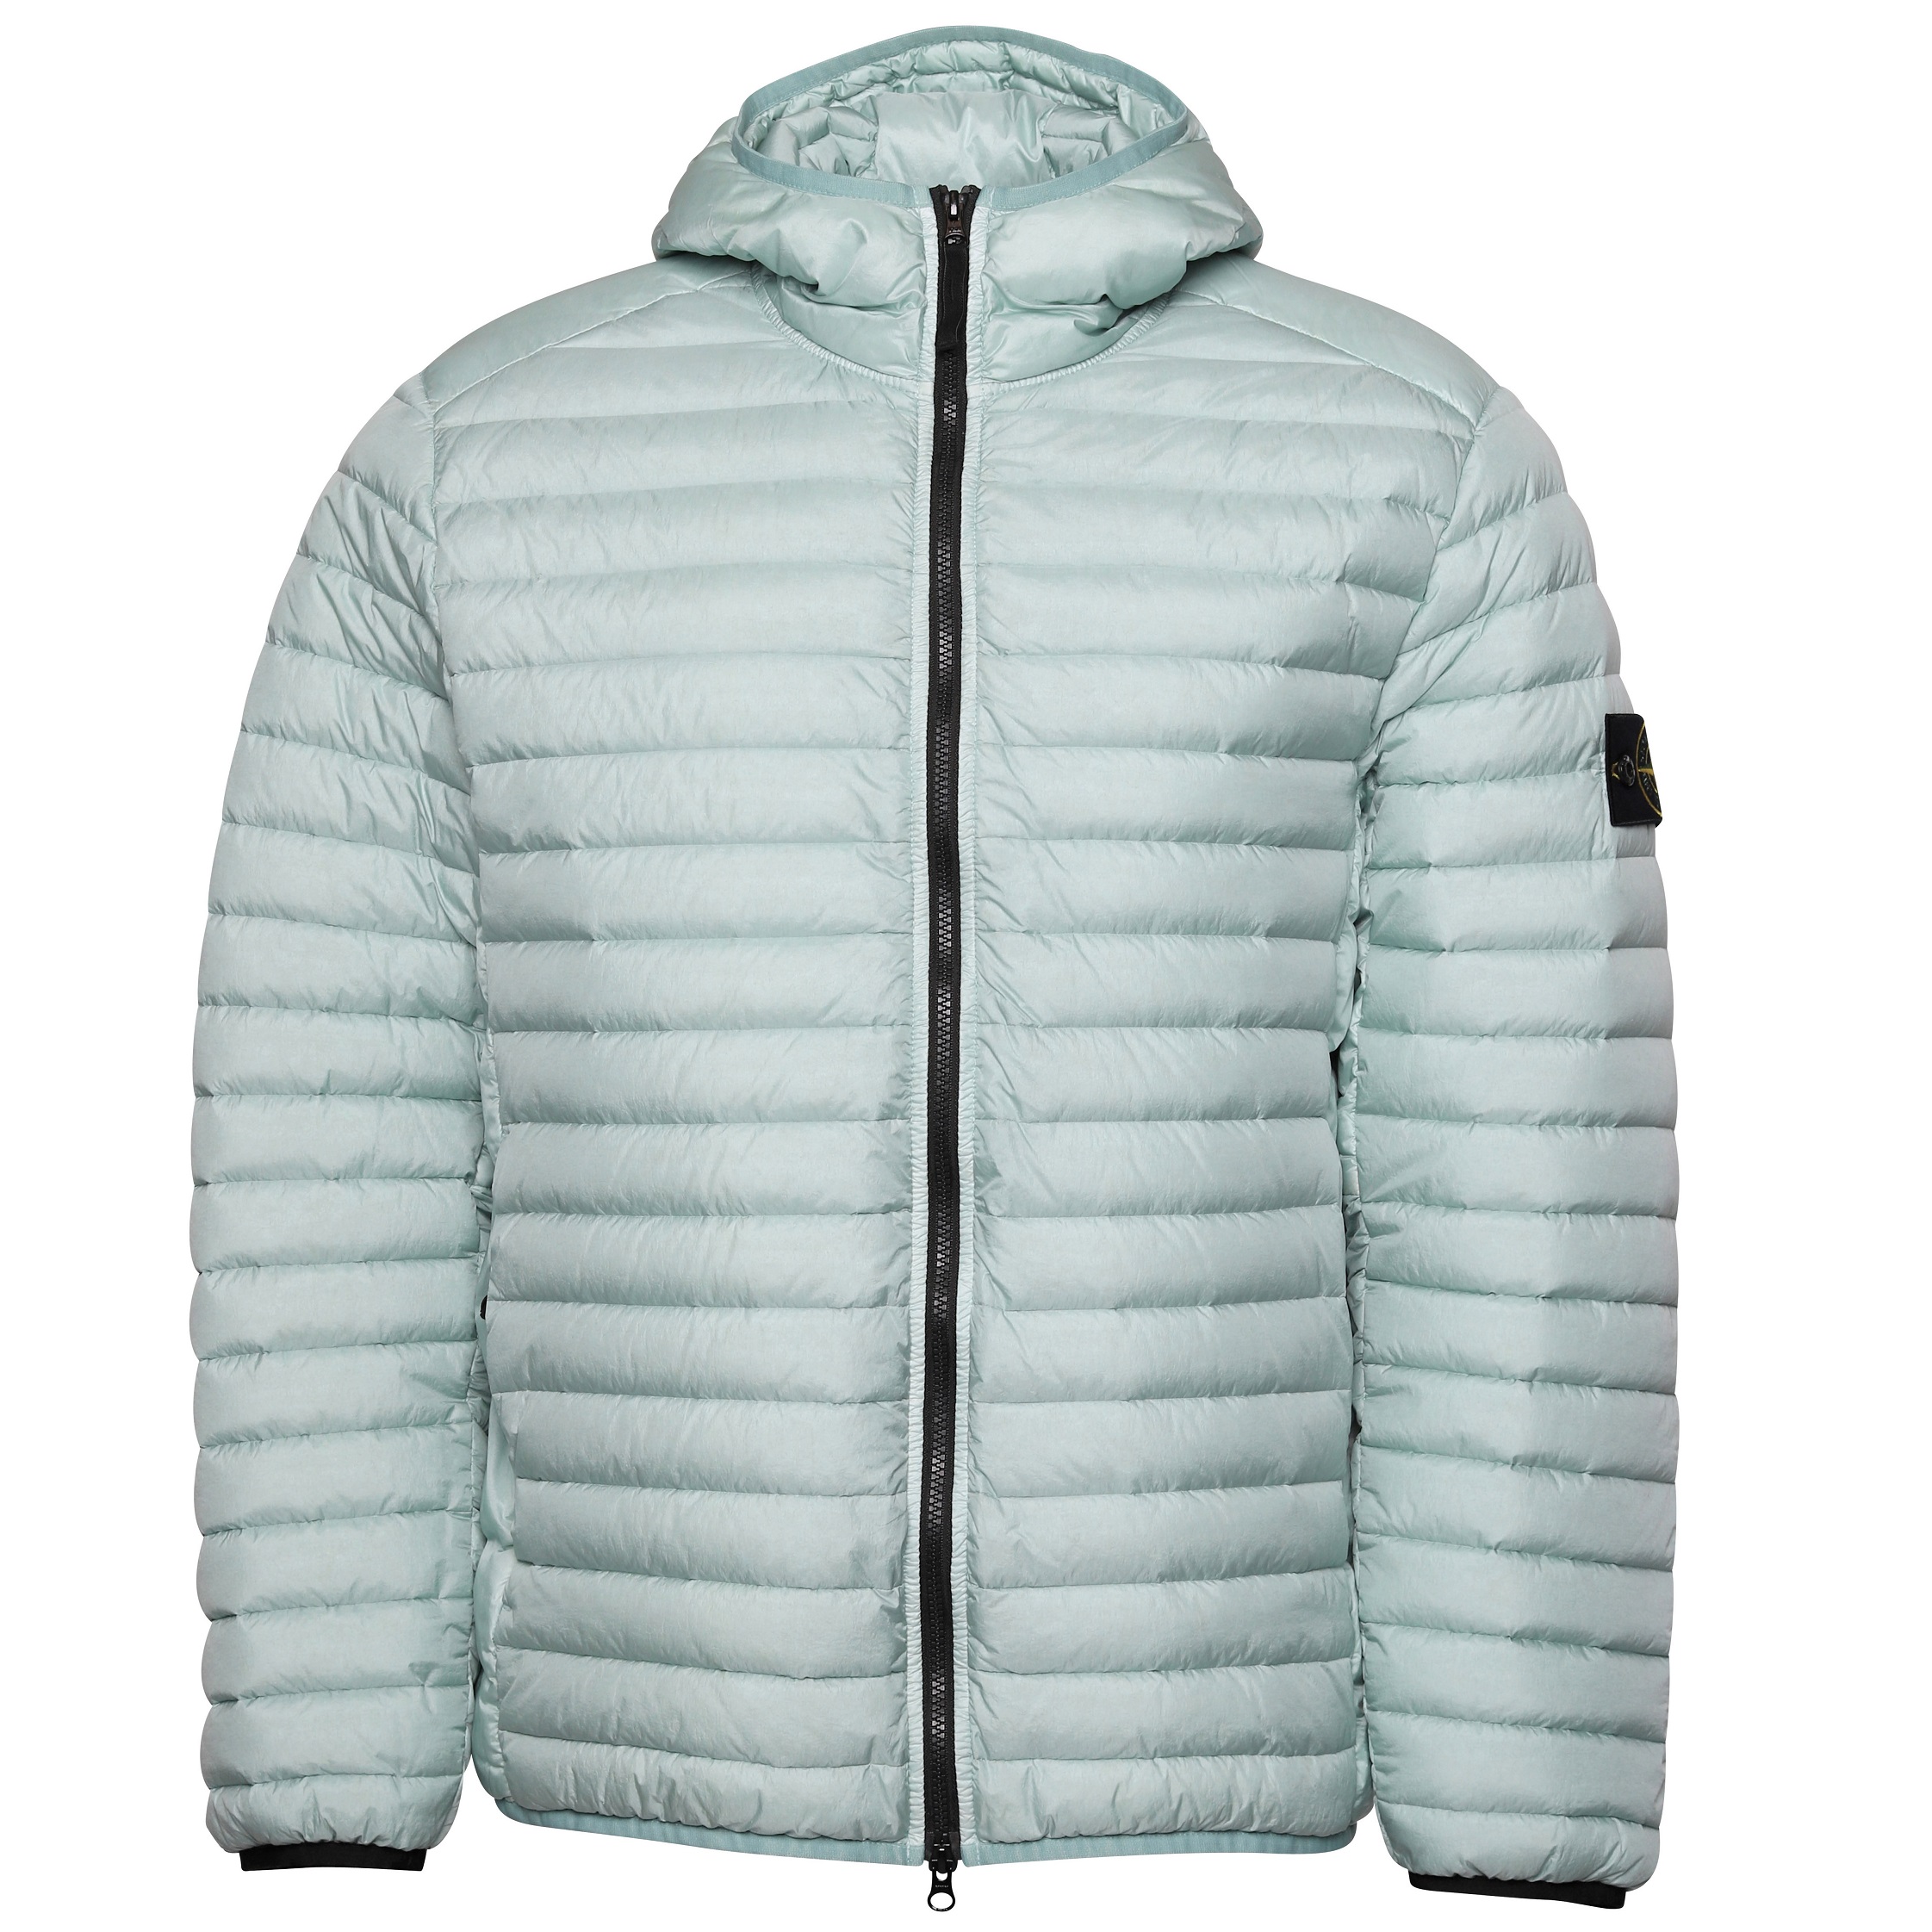 Stone Island Hooded Real Down Jacket in Sky Blue 2XL